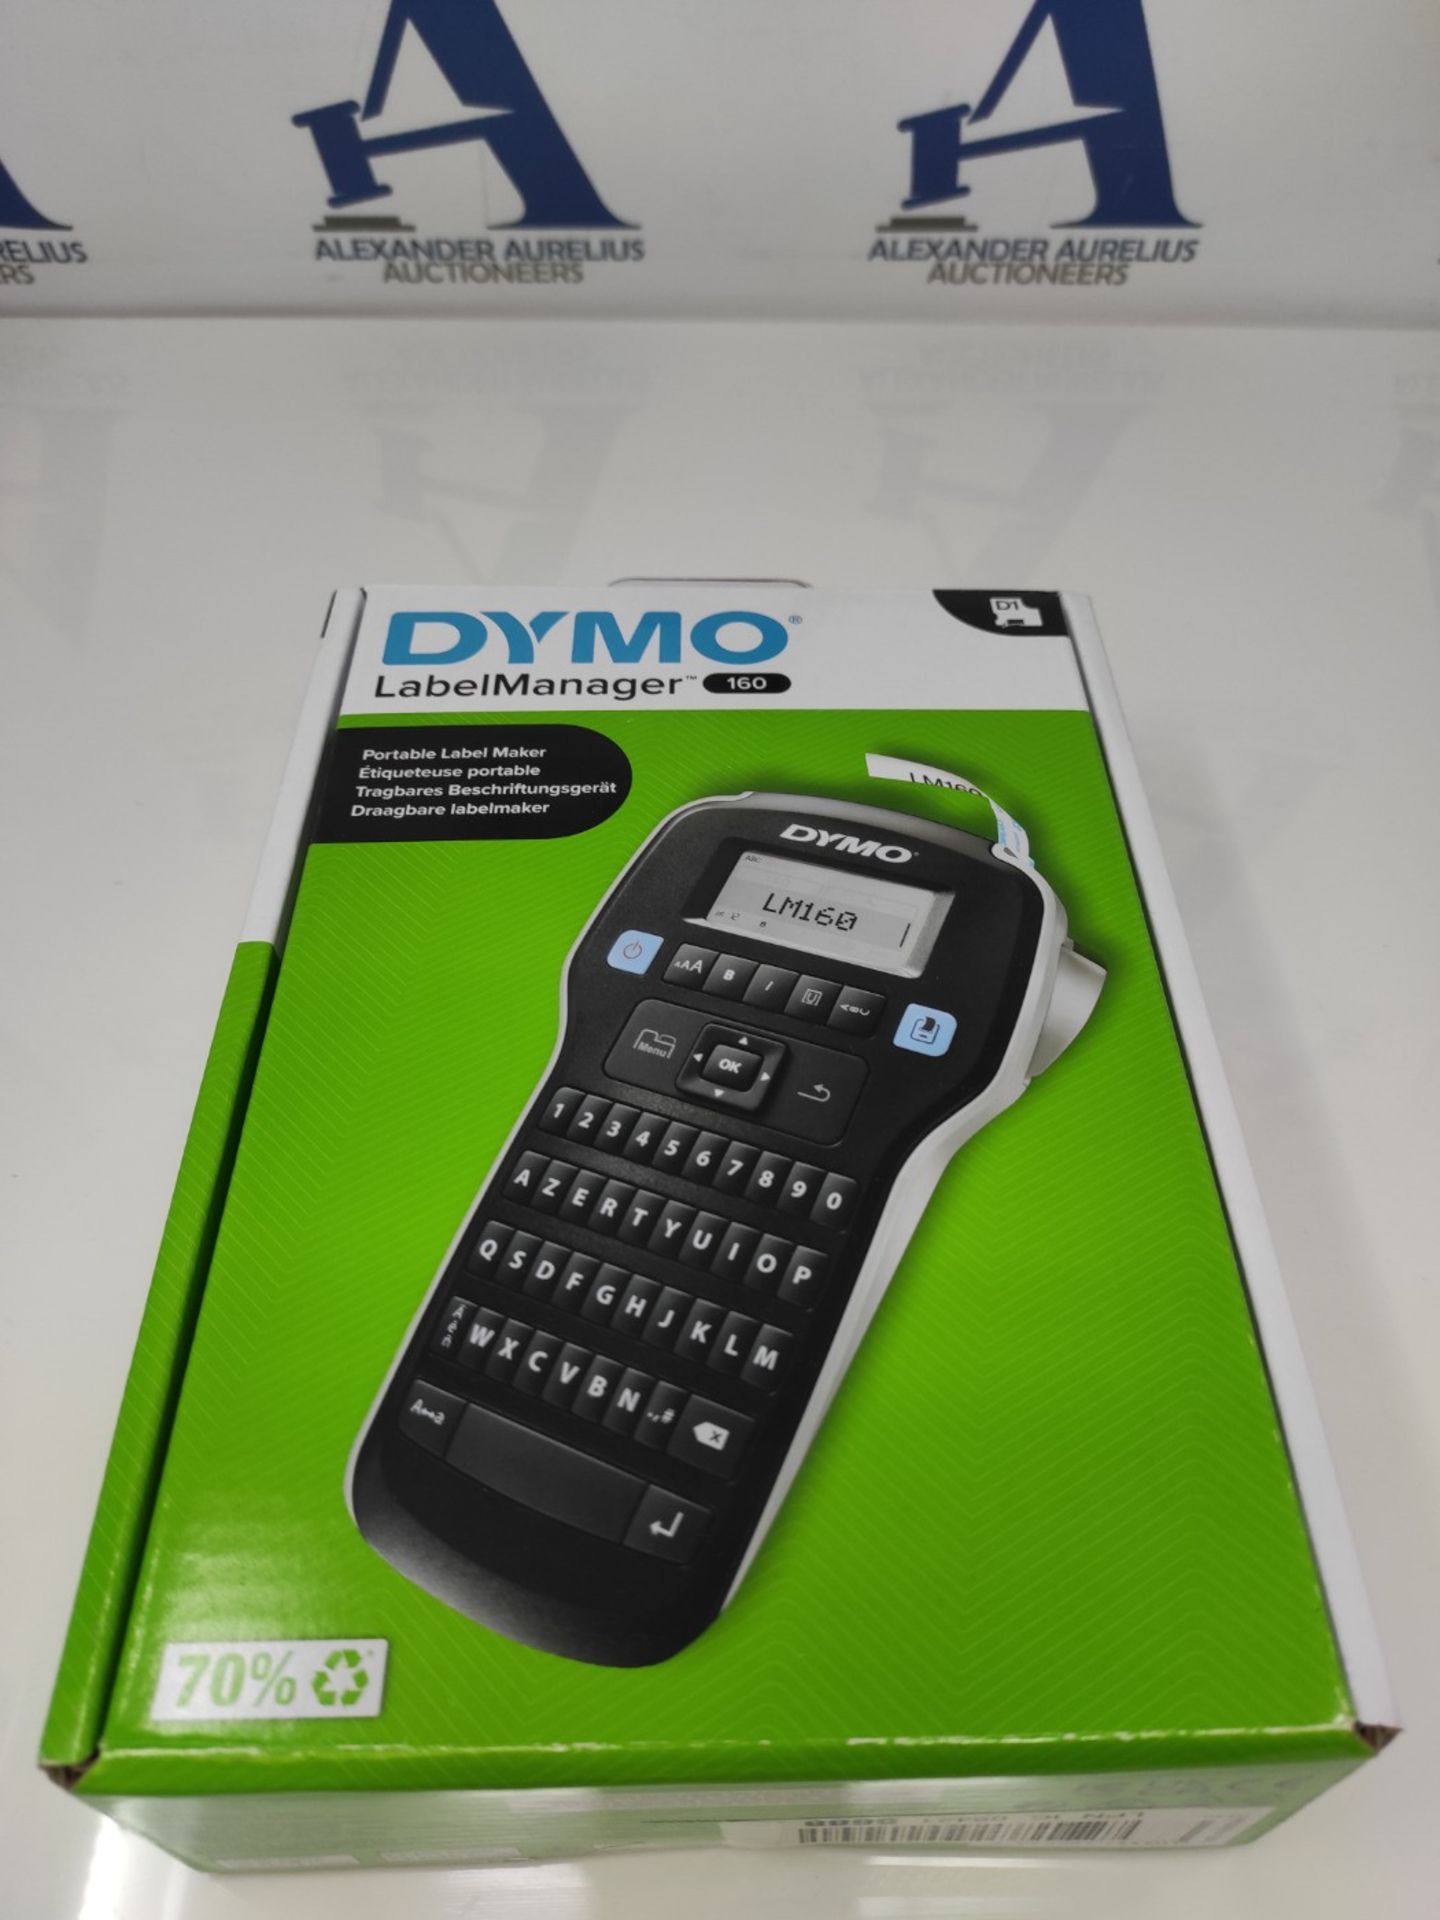 RRP £59.00 DYMO LabelManager 160 Label Maker | AZERTY Keyboard | Portable Label Sticker Printer - Image 2 of 3